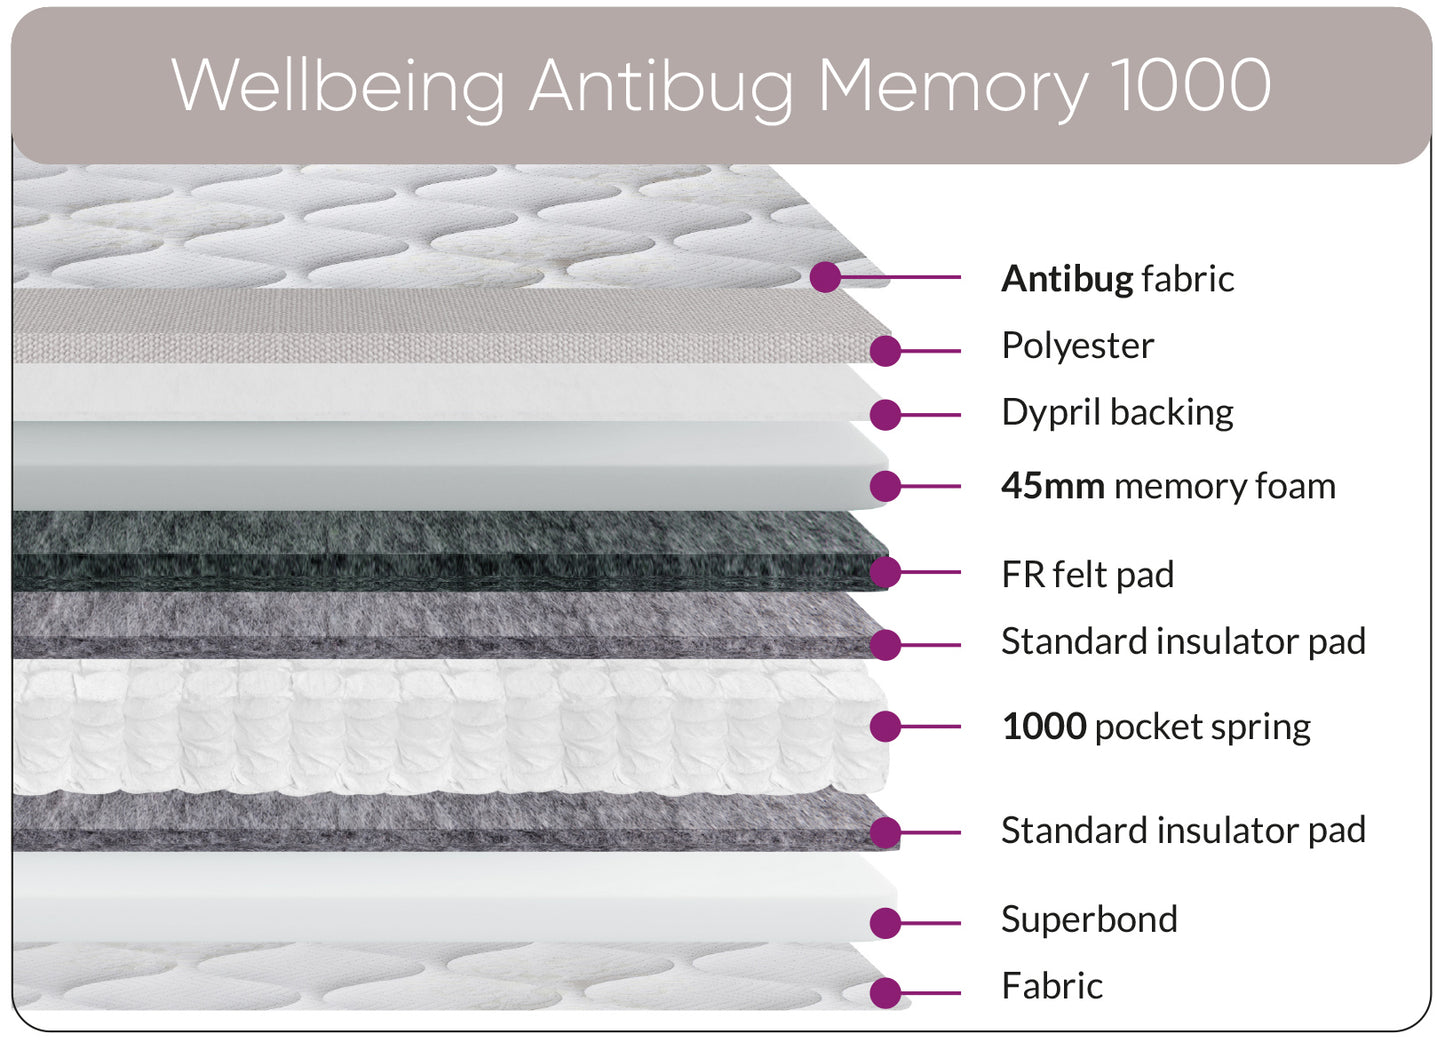 Sweet Dreams Antibug Mattress. Fast delivery available.